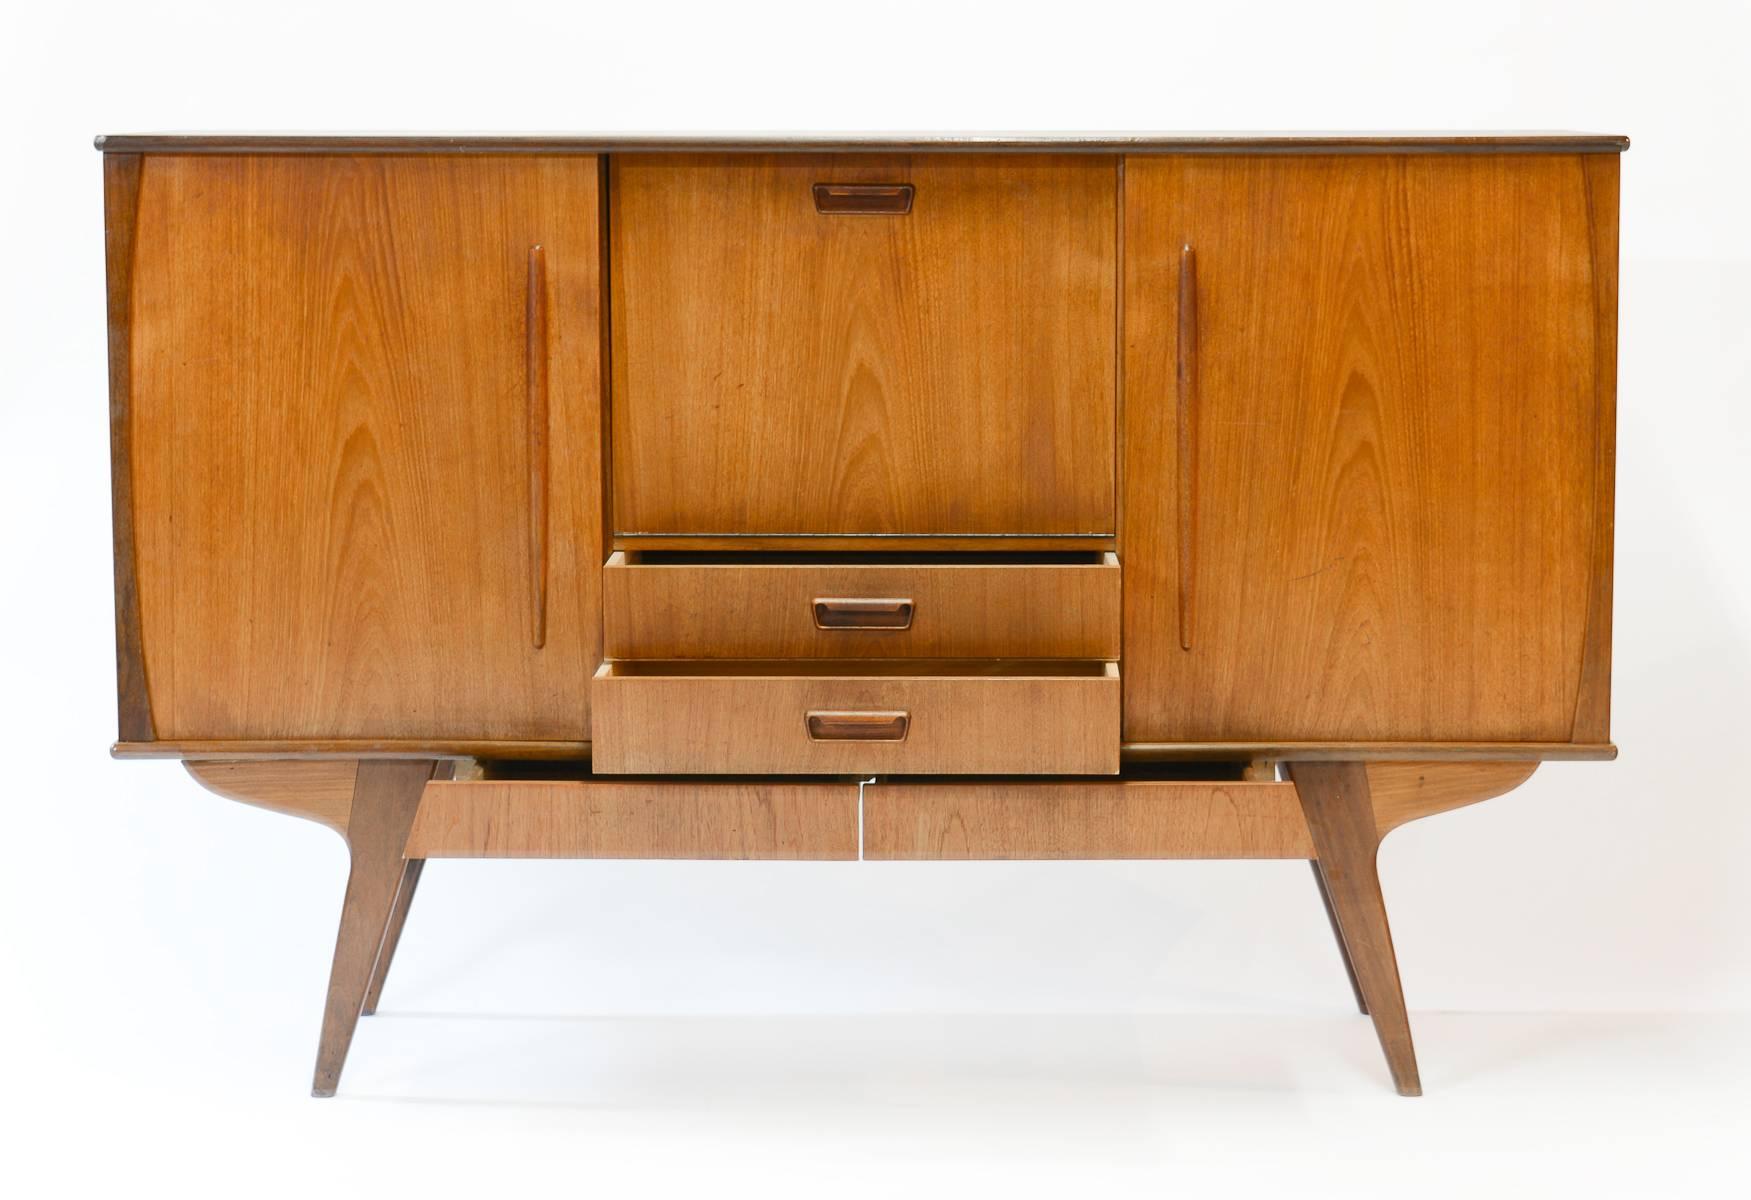 Mid-20th Century Elegant Monumental Danish Teak Sideboard with Angled Legs and Drop-Door Bar For Sale